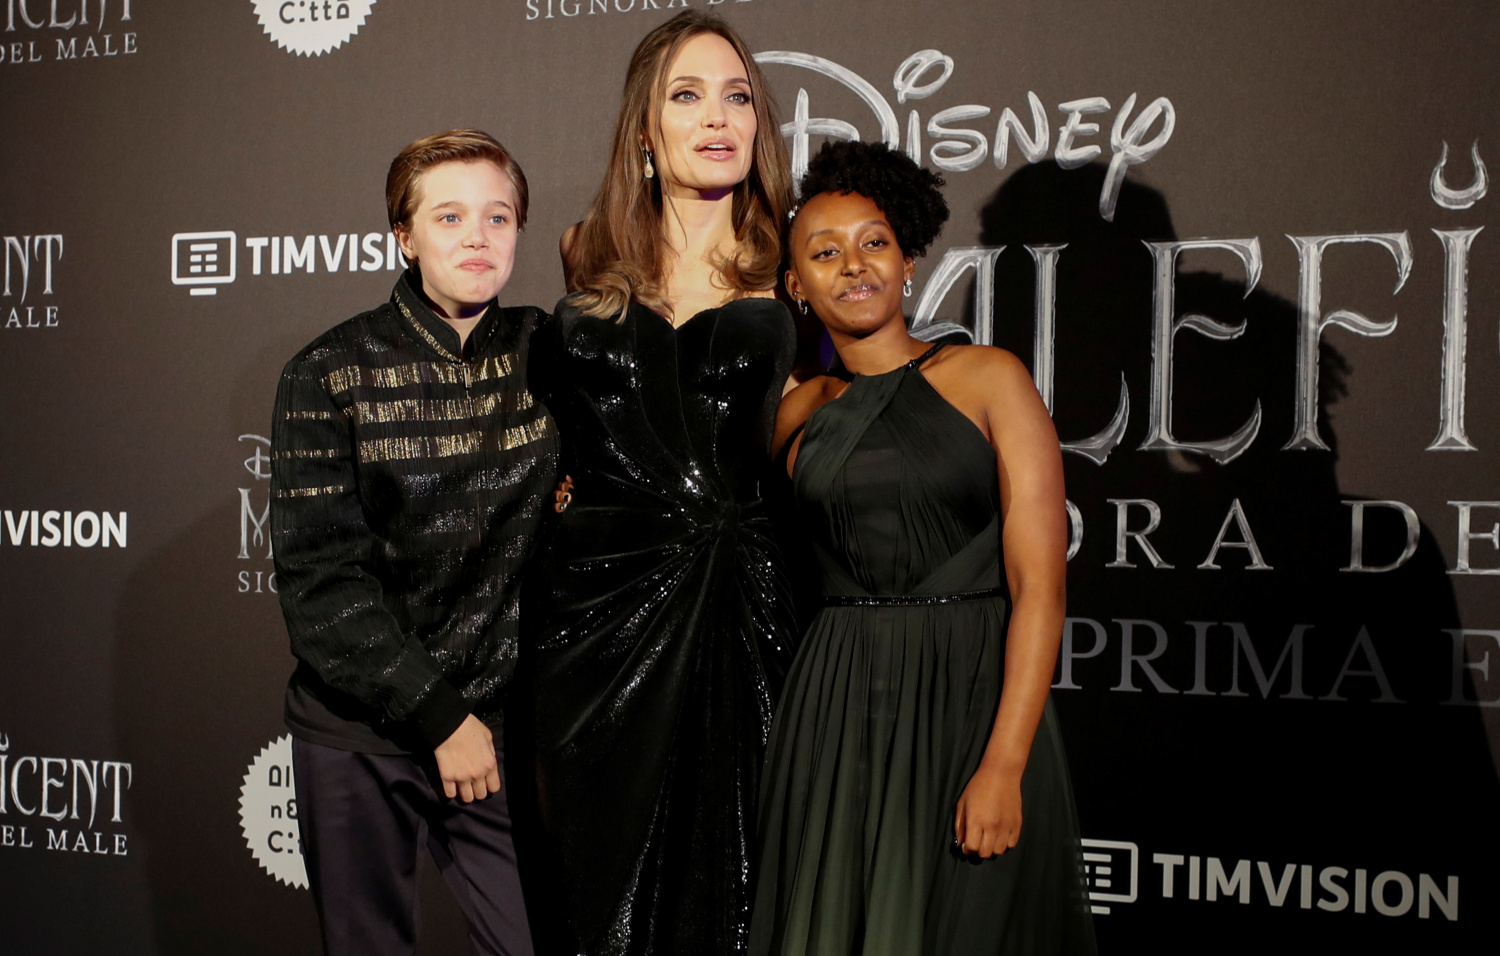 Shiloh Jolie Pitt Allegedly Moved In With Brad Pitt And Jennifer Aniston Angelina Jolie Reportedly Furious